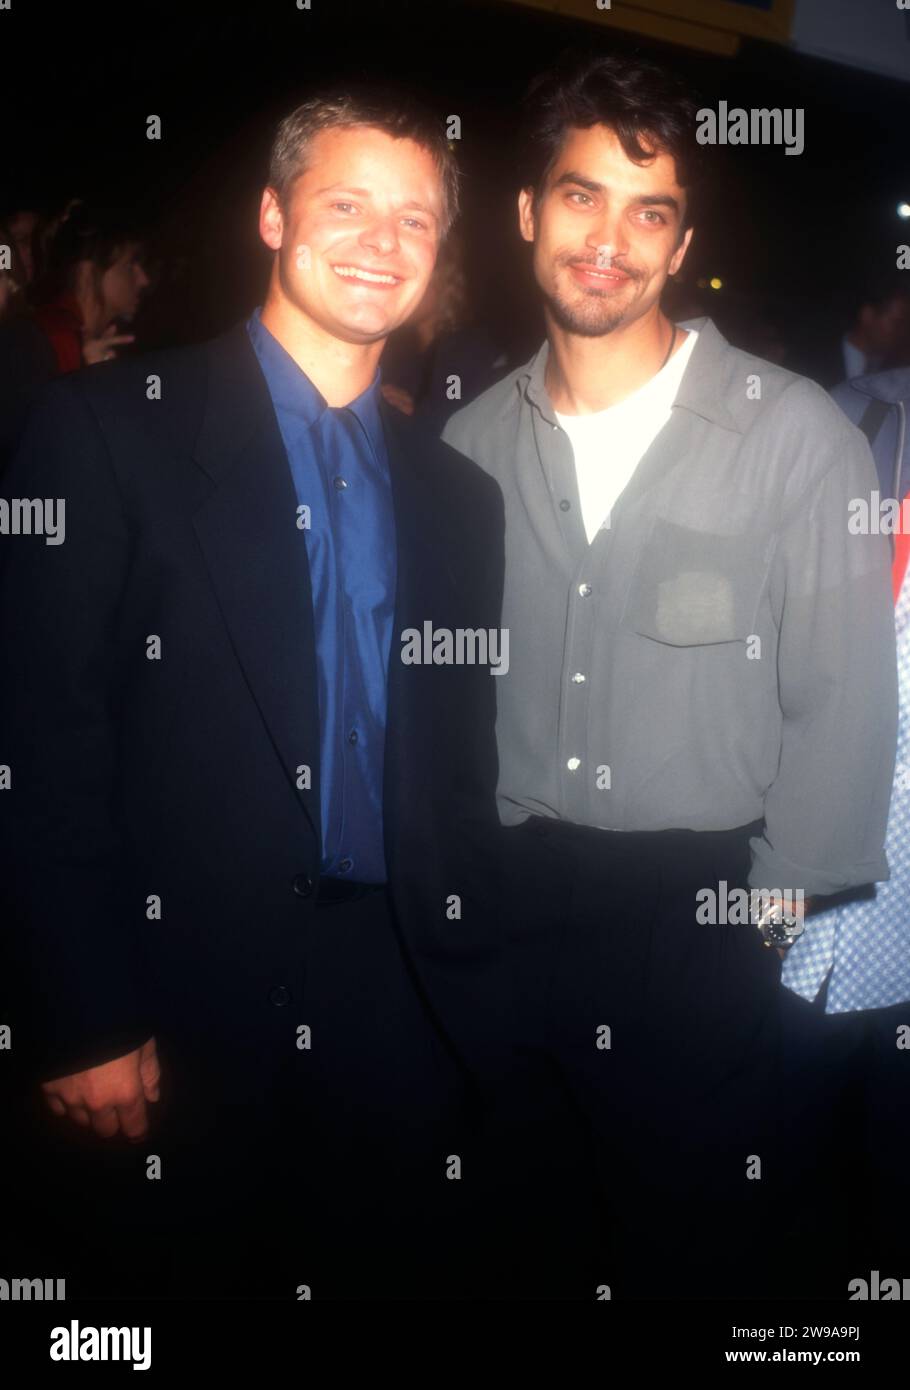 Century City, California, USA 30th September 1996 Actor Steve Zahn and Actor Johnathon Schaech attend 20th Century StudioÕs ÔThat Thing You DoÕ Premiere at Century City Cineplex Odeon Theaters on September 30, 1996 in Century City, California, USA. Photo by Barry King/Alamy Stock Photo Stock Photo